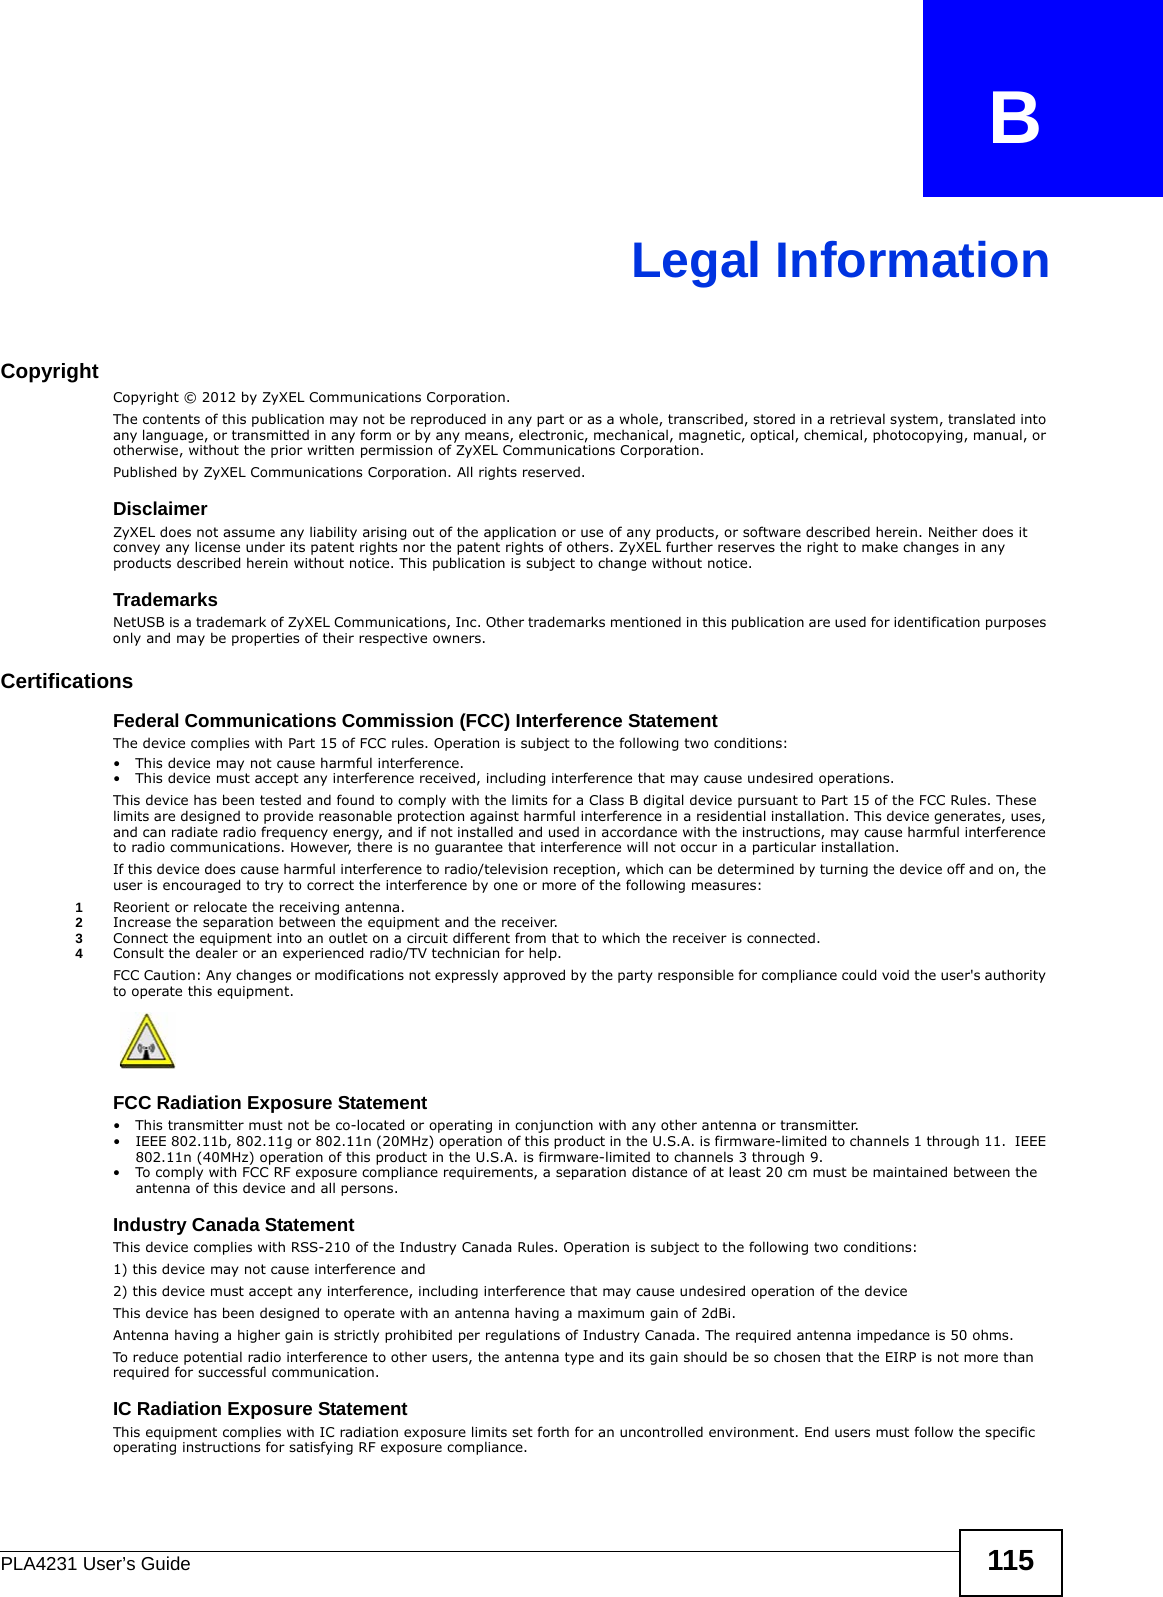 PLA4231 User’s Guide 115APPENDIX   BLegal InformationCopyrightCopyright © 2012 by ZyXEL Communications Corporation.The contents of this publication may not be reproduced in any part or as a whole, transcribed, stored in a retrieval system, translated into any language, or transmitted in any form or by any means, electronic, mechanical, magnetic, optical, chemical, photocopying, manual, or otherwise, without the prior written permission of ZyXEL Communications Corporation.Published by ZyXEL Communications Corporation. All rights reserved.DisclaimerZyXEL does not assume any liability arising out of the application or use of any products, or software described herein. Neither does it convey any license under its patent rights nor the patent rights of others. ZyXEL further reserves the right to make changes in any products described herein without notice. This publication is subject to change without notice.TrademarksNetUSB is a trademark of ZyXEL Communications, Inc. Other trademarks mentioned in this publication are used for identification purposes only and may be properties of their respective owners.Certifications  Federal Communications Commission (FCC) Interference Statement The device complies with Part 15 of FCC rules. Operation is subject to the following two conditions:• This device may not cause harmful interference.• This device must accept any interference received, including interference that may cause undesired operations.This device has been tested and found to comply with the limits for a Class B digital device pursuant to Part 15 of the FCC Rules. These limits are designed to provide reasonable protection against harmful interference in a residential installation. This device generates, uses, and can radiate radio frequency energy, and if not installed and used in accordance with the instructions, may cause harmful interference to radio communications. However, there is no guarantee that interference will not occur in a particular installation.If this device does cause harmful interference to radio/television reception, which can be determined by turning the device off and on, the user is encouraged to try to correct the interference by one or more of the following measures:1Reorient or relocate the receiving antenna.2Increase the separation between the equipment and the receiver.3Connect the equipment into an outlet on a circuit different from that to which the receiver is connected.4Consult the dealer or an experienced radio/TV technician for help.FCC Caution: Any changes or modifications not expressly approved by the party responsible for compliance could void the user&apos;s authority to operate this equipment.FCC Radiation Exposure Statement • This transmitter must not be co-located or operating in conjunction with any other antenna or transmitter. • IEEE 802.11b, 802.11g or 802.11n (20MHz) operation of this product in the U.S.A. is firmware-limited to channels 1 through 11.  IEEE 802.11n (40MHz) operation of this product in the U.S.A. is firmware-limited to channels 3 through 9.• To comply with FCC RF exposure compliance requirements, a separation distance of at least 20 cm must be maintained between the antenna of this device and all persons. Industry Canada StatementThis device complies with RSS-210 of the Industry Canada Rules. Operation is subject to the following two conditions:1) this device may not cause interference and2) this device must accept any interference, including interference that may cause undesired operation of the deviceThis device has been designed to operate with an antenna having a maximum gain of 2dBi.Antenna having a higher gain is strictly prohibited per regulations of Industry Canada. The required antenna impedance is 50 ohms.To reduce potential radio interference to other users, the antenna type and its gain should be so chosen that the EIRP is not more than required for successful communication.IC Radiation Exposure Statement This equipment complies with IC radiation exposure limits set forth for an uncontrolled environment. End users must follow the specific operating instructions for satisfying RF exposure compliance.